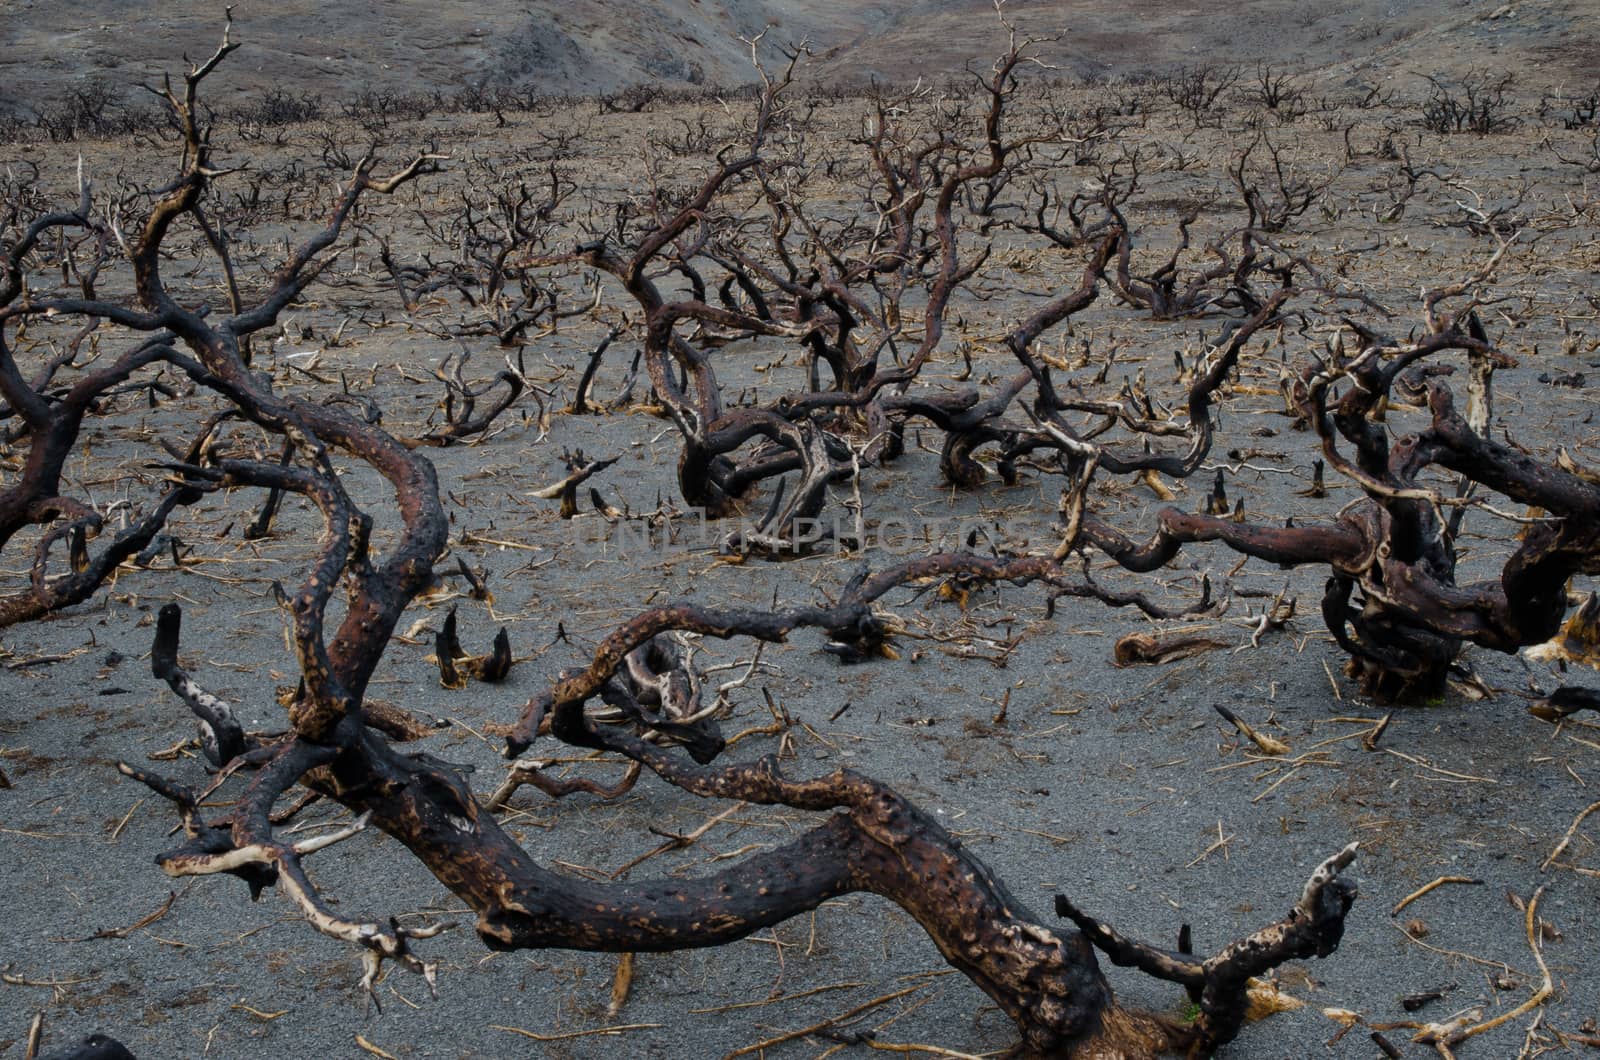 Burned shrubland in the Torres del Paine National Park by the great fire in 2011-2012. by VictorSuarez